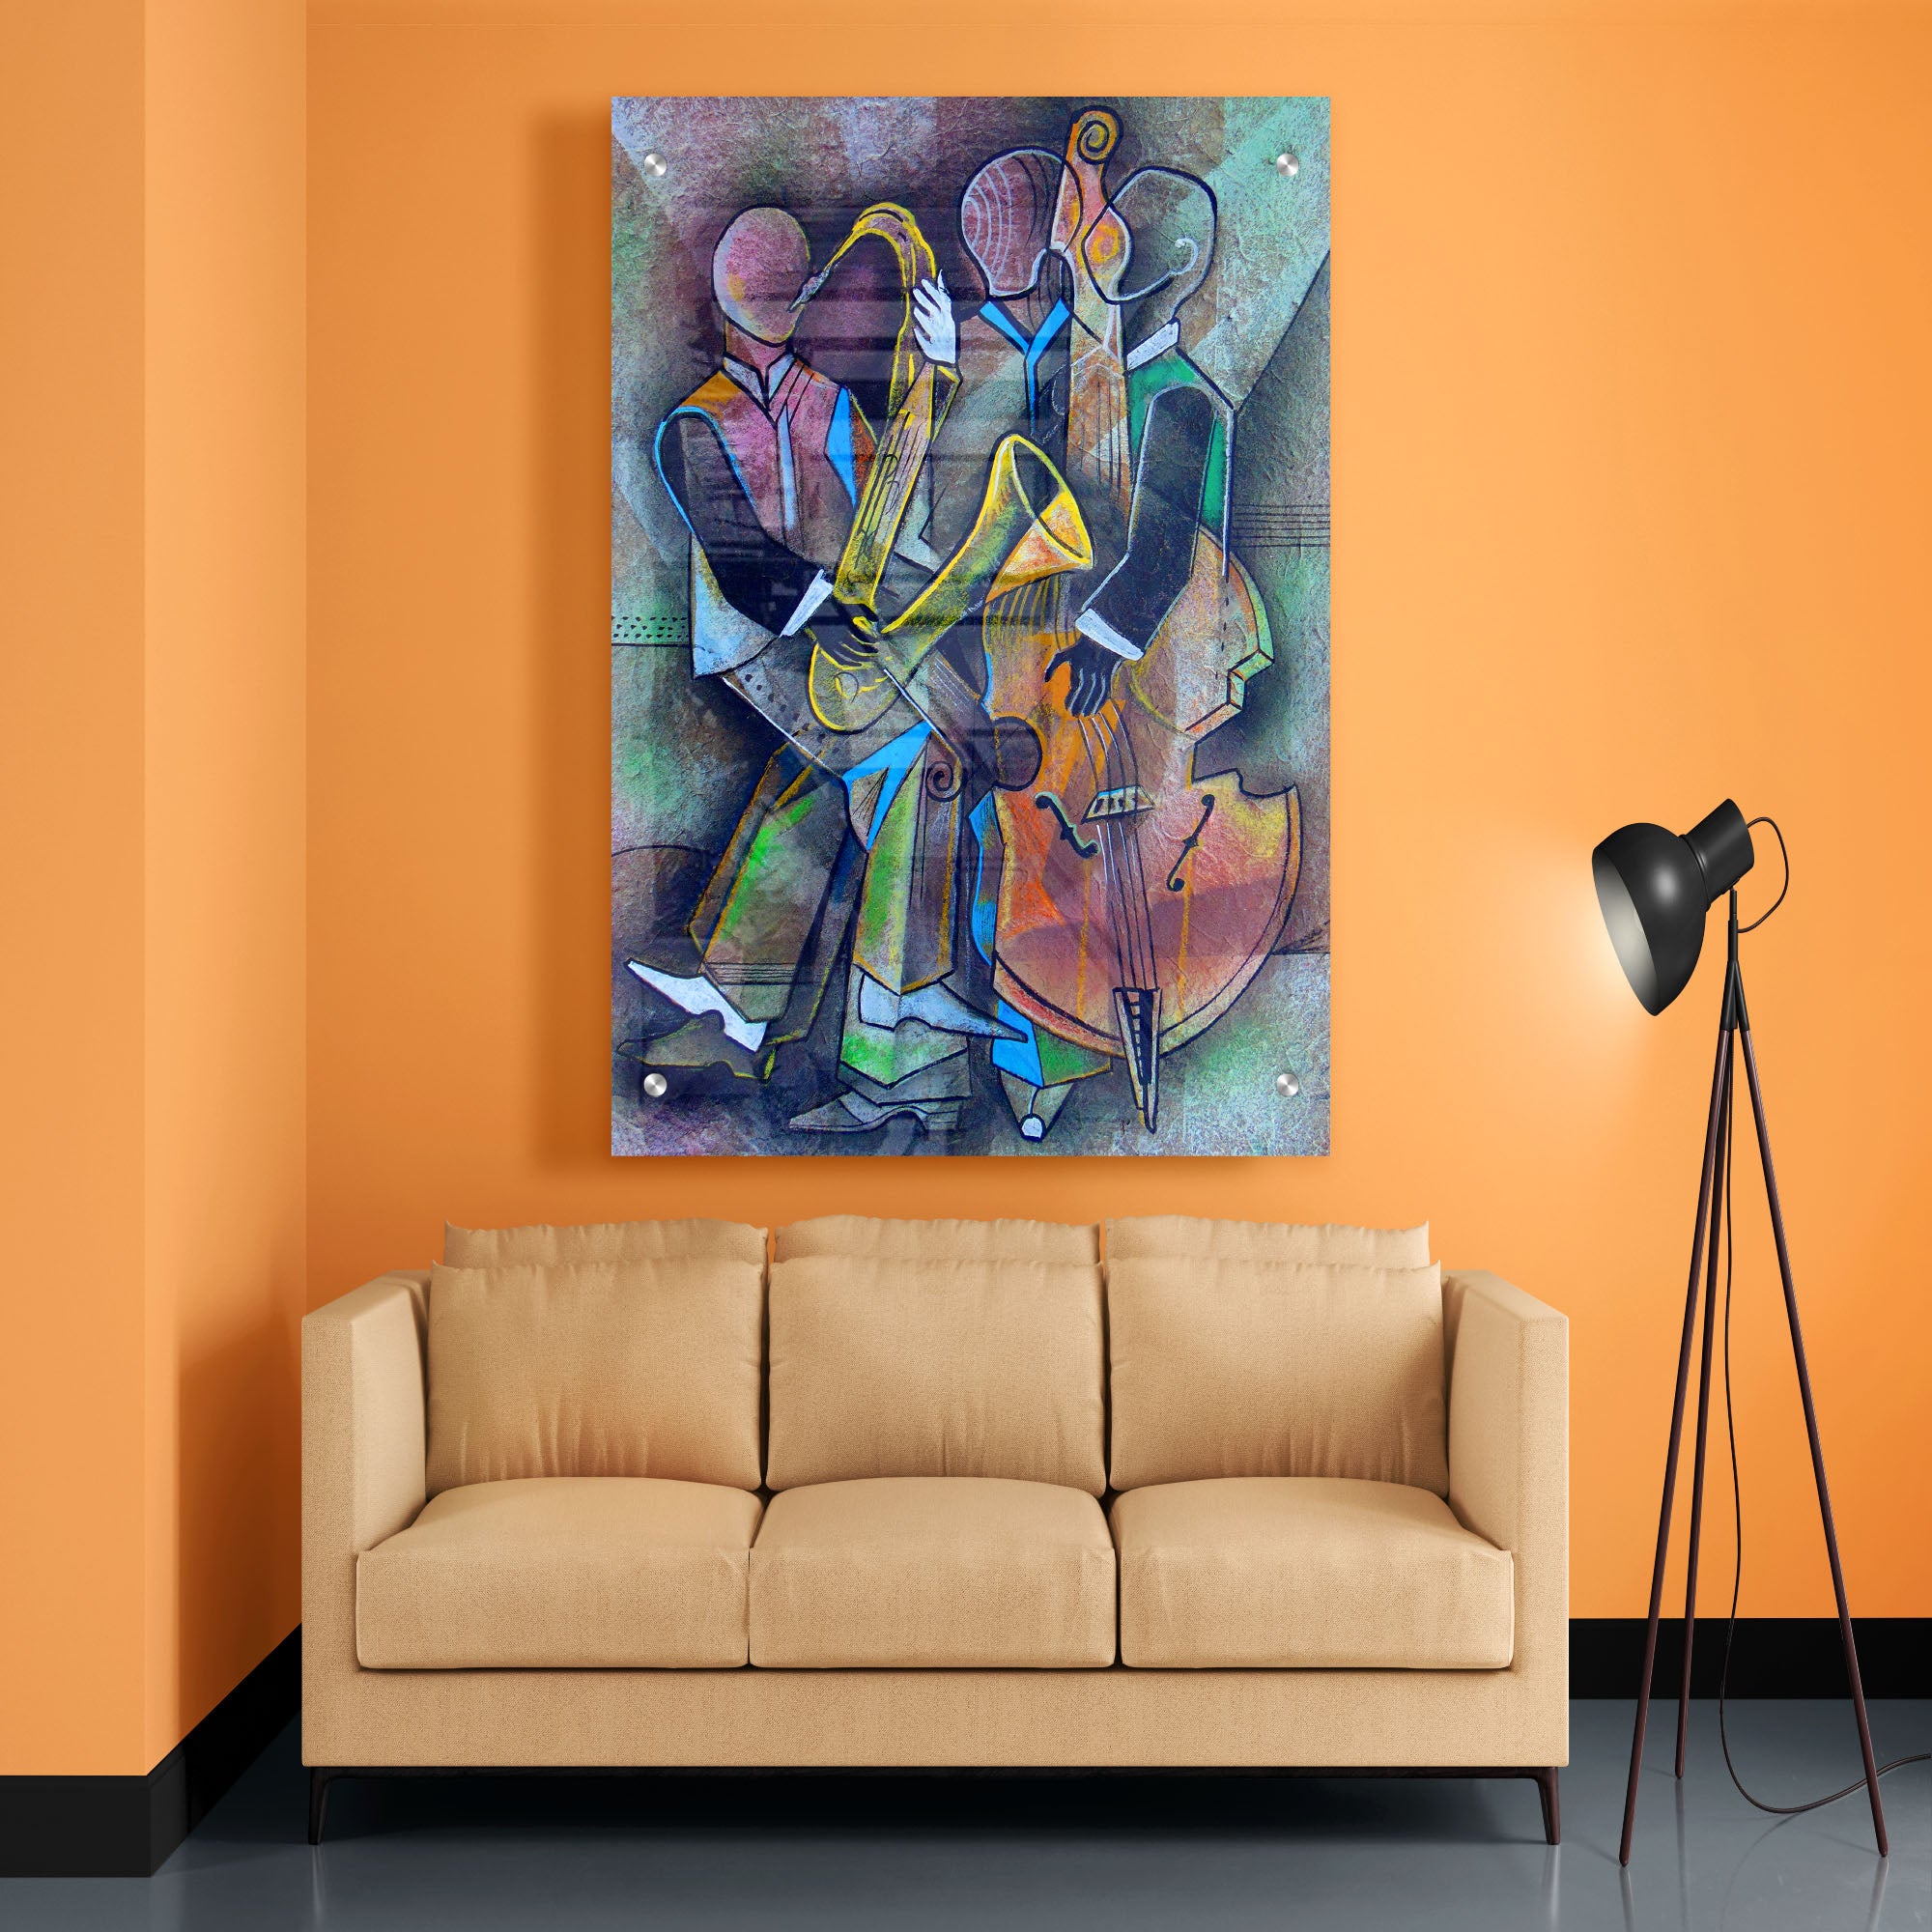 Musicians Cubism Picasso Style Artistic Abstract Acrylic Wall Painting